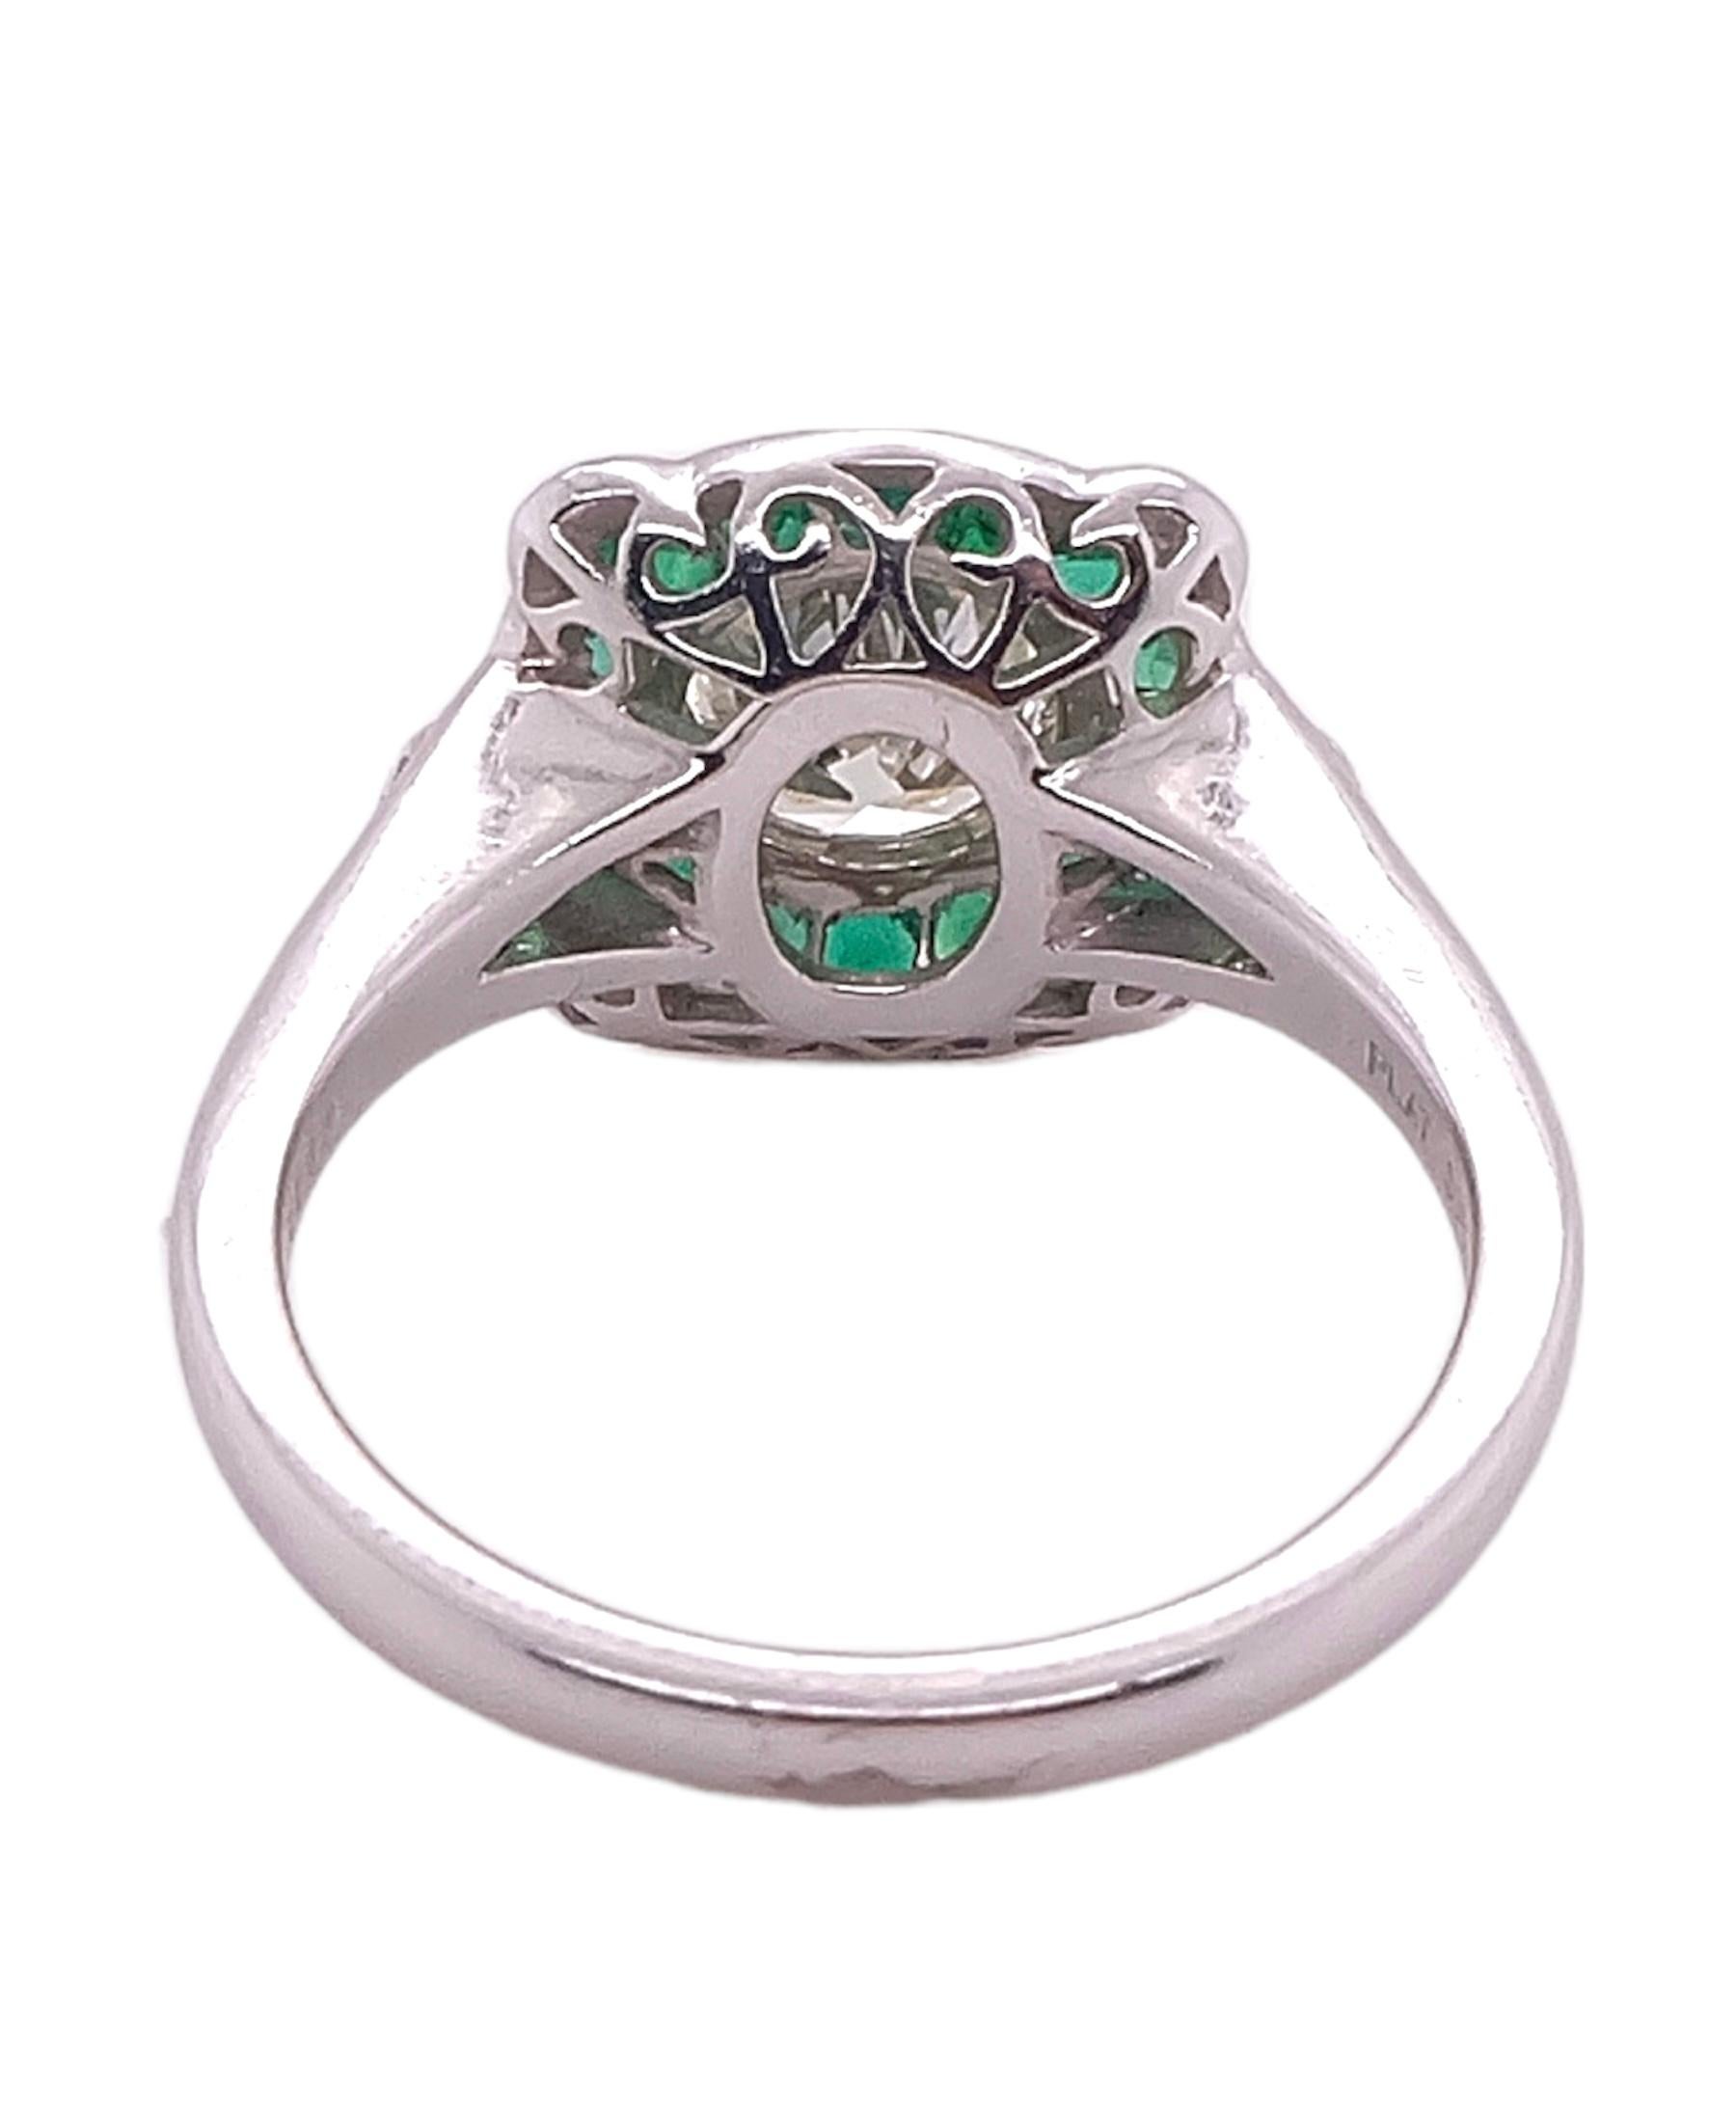 Beautifully designed Art Deco Emerald and Diamond Platinum Ring by Sophia D with 0.81 round cut diamond ring, 0.14 carats of small diamonds and 0.88 carats of emeralds. Ring is available for resizing.
